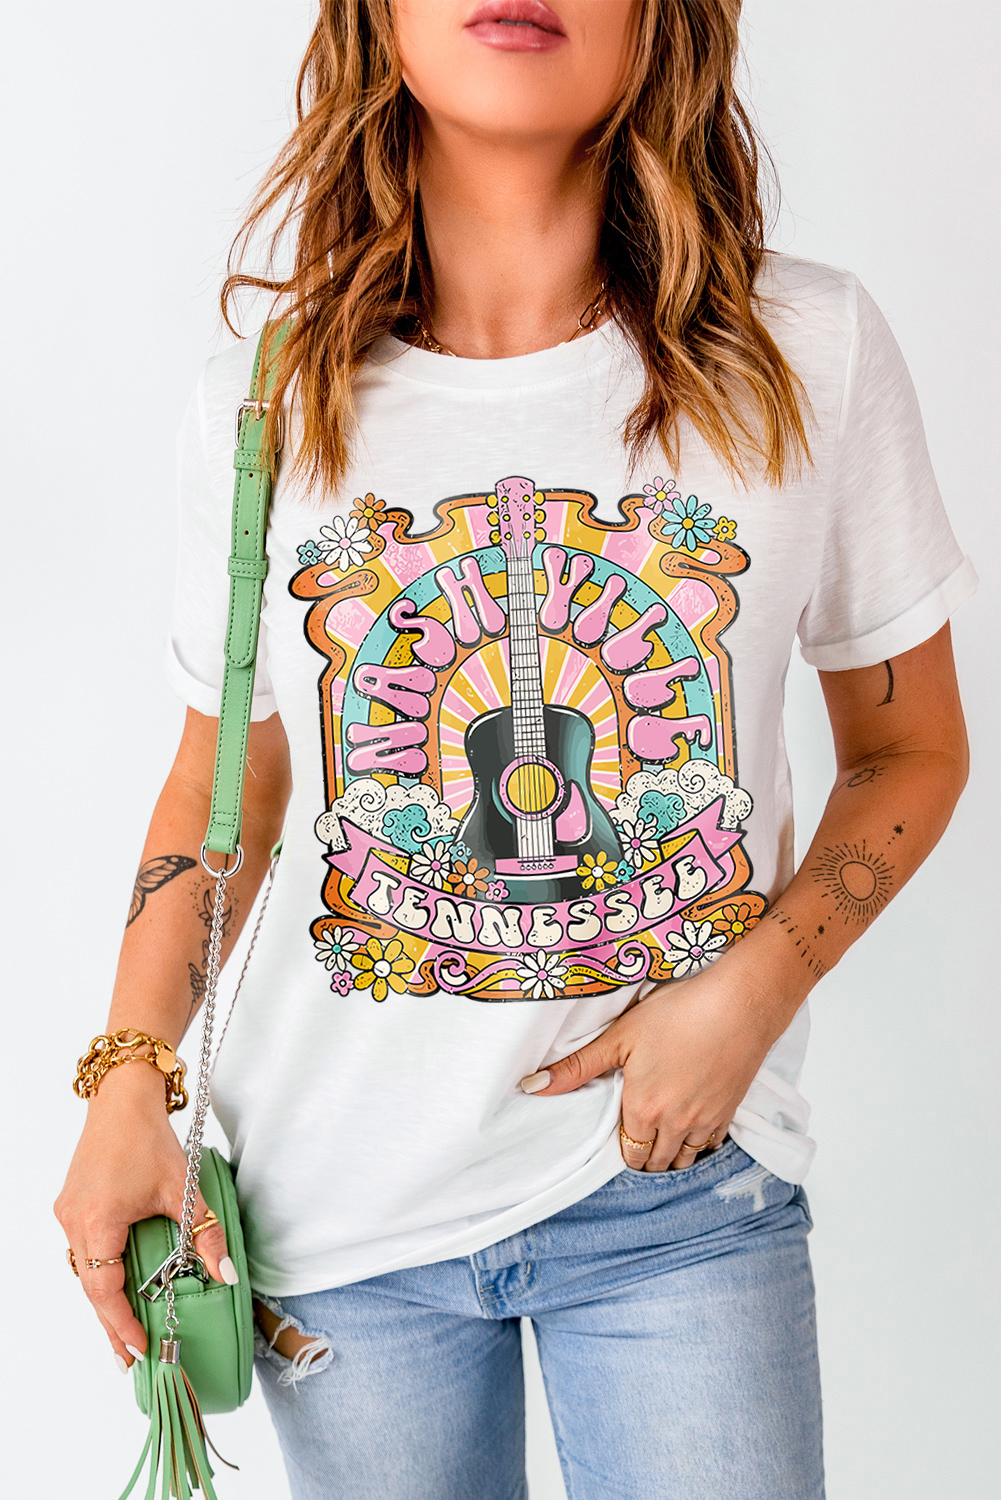 Shewin Wholesale Casual White MUSIC Festival Nashville Letter Print Graphic Tee